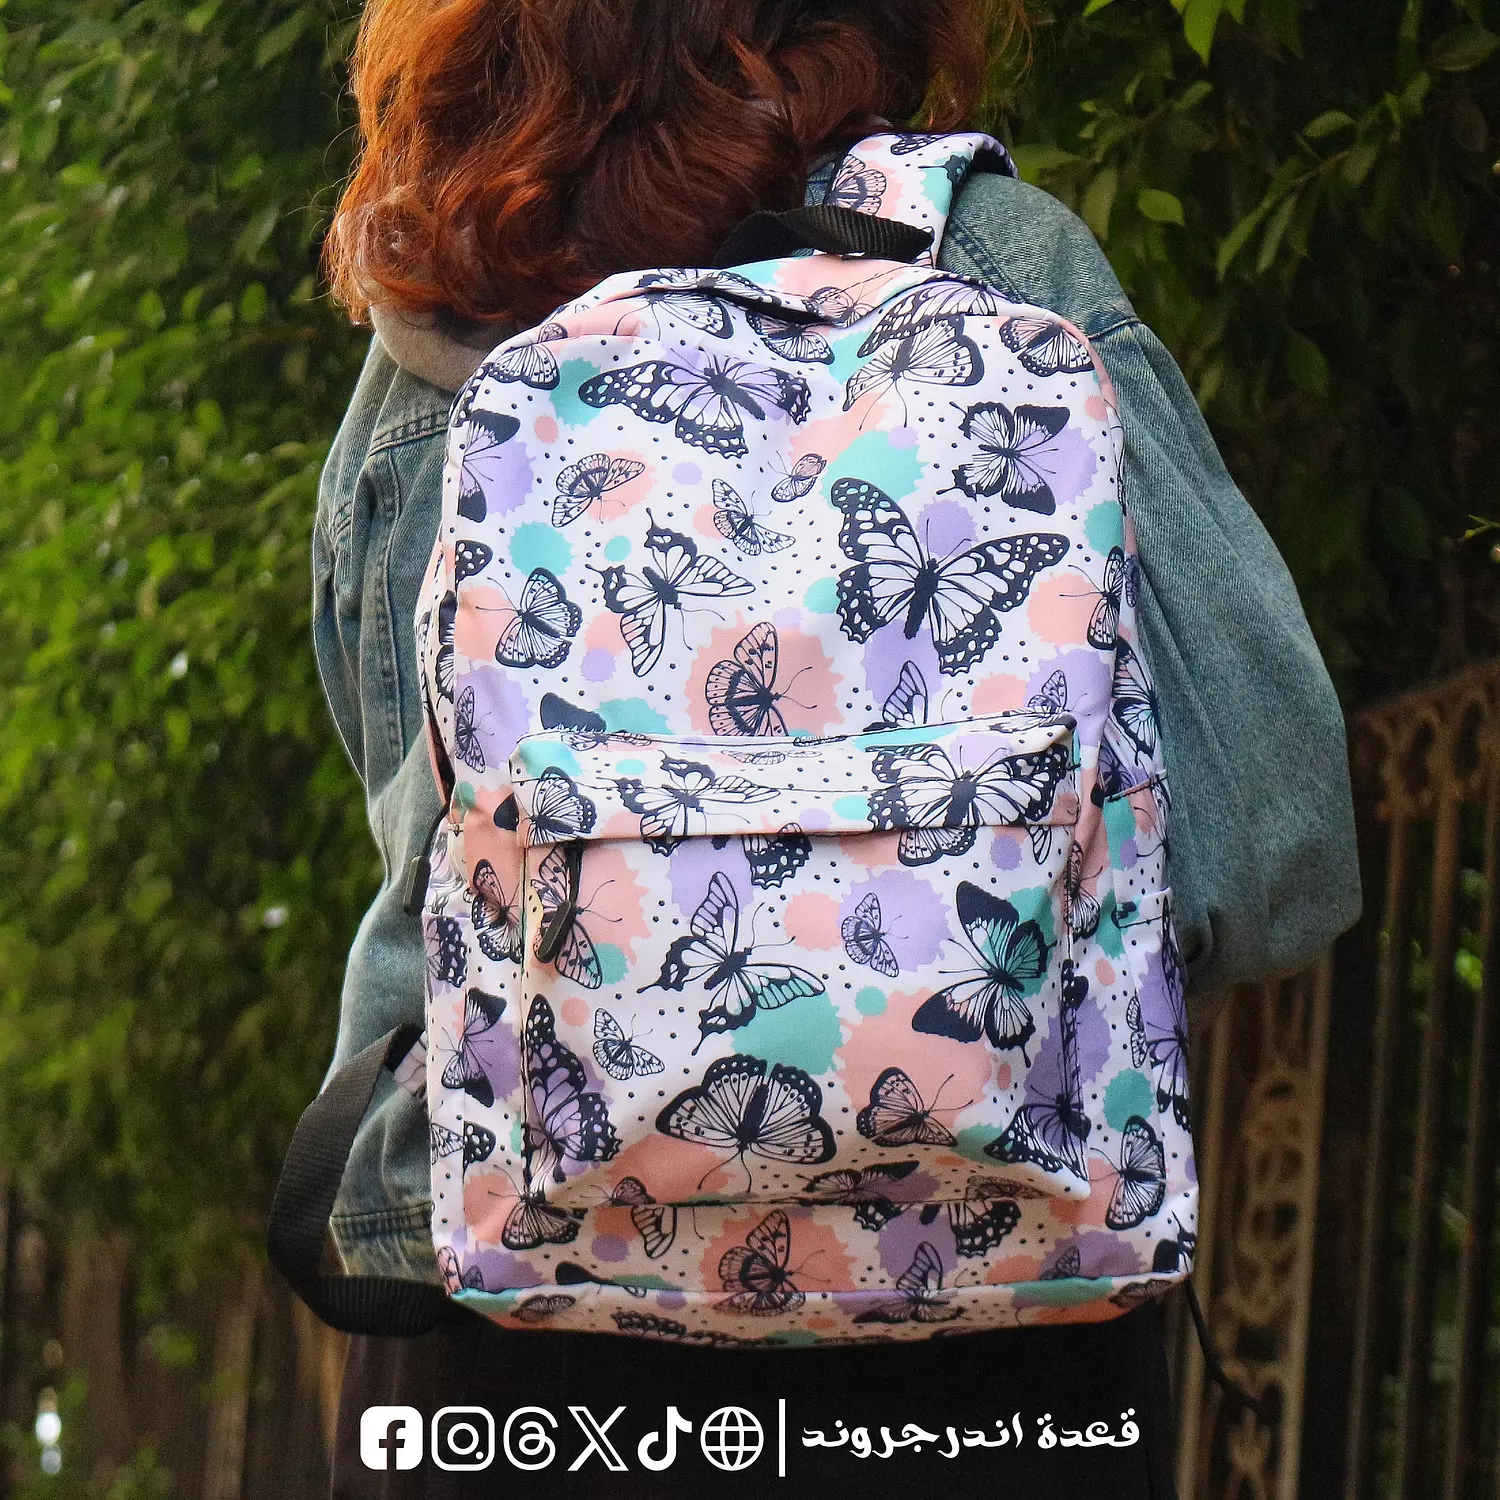 Butterfly 🦋 Backpack 🎒 0